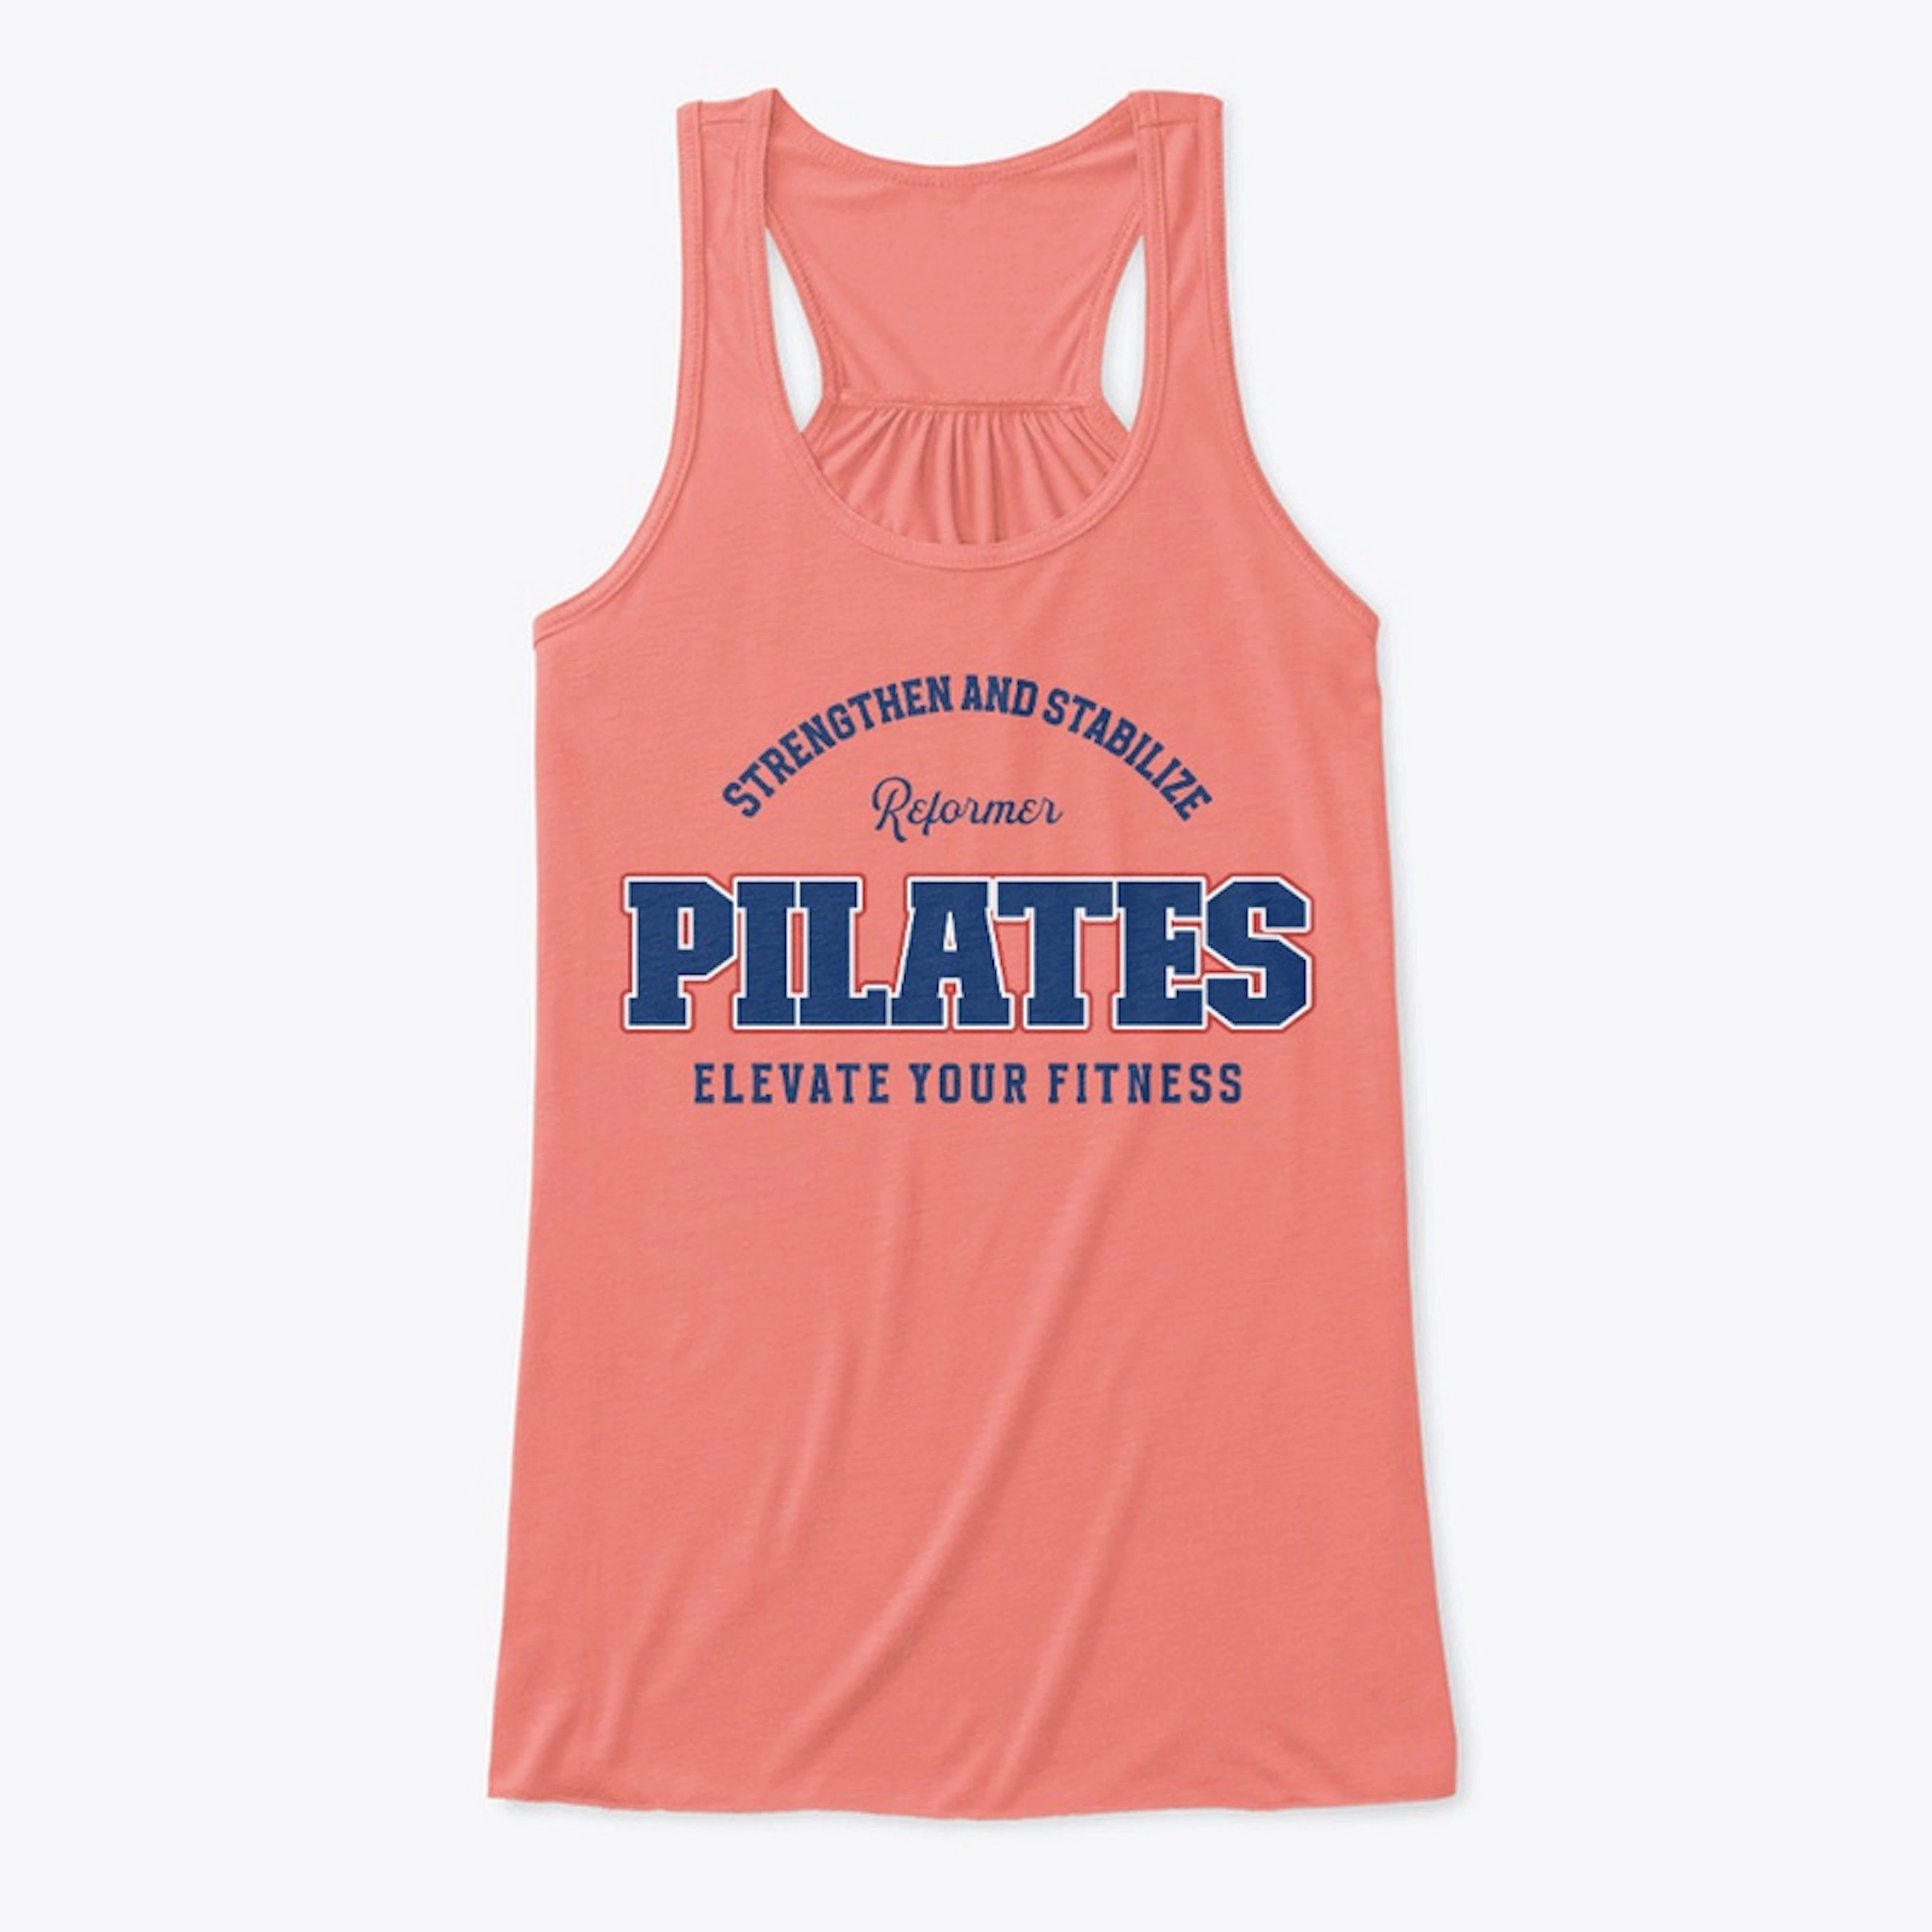 Pilates Power: Elevate Your Fitness